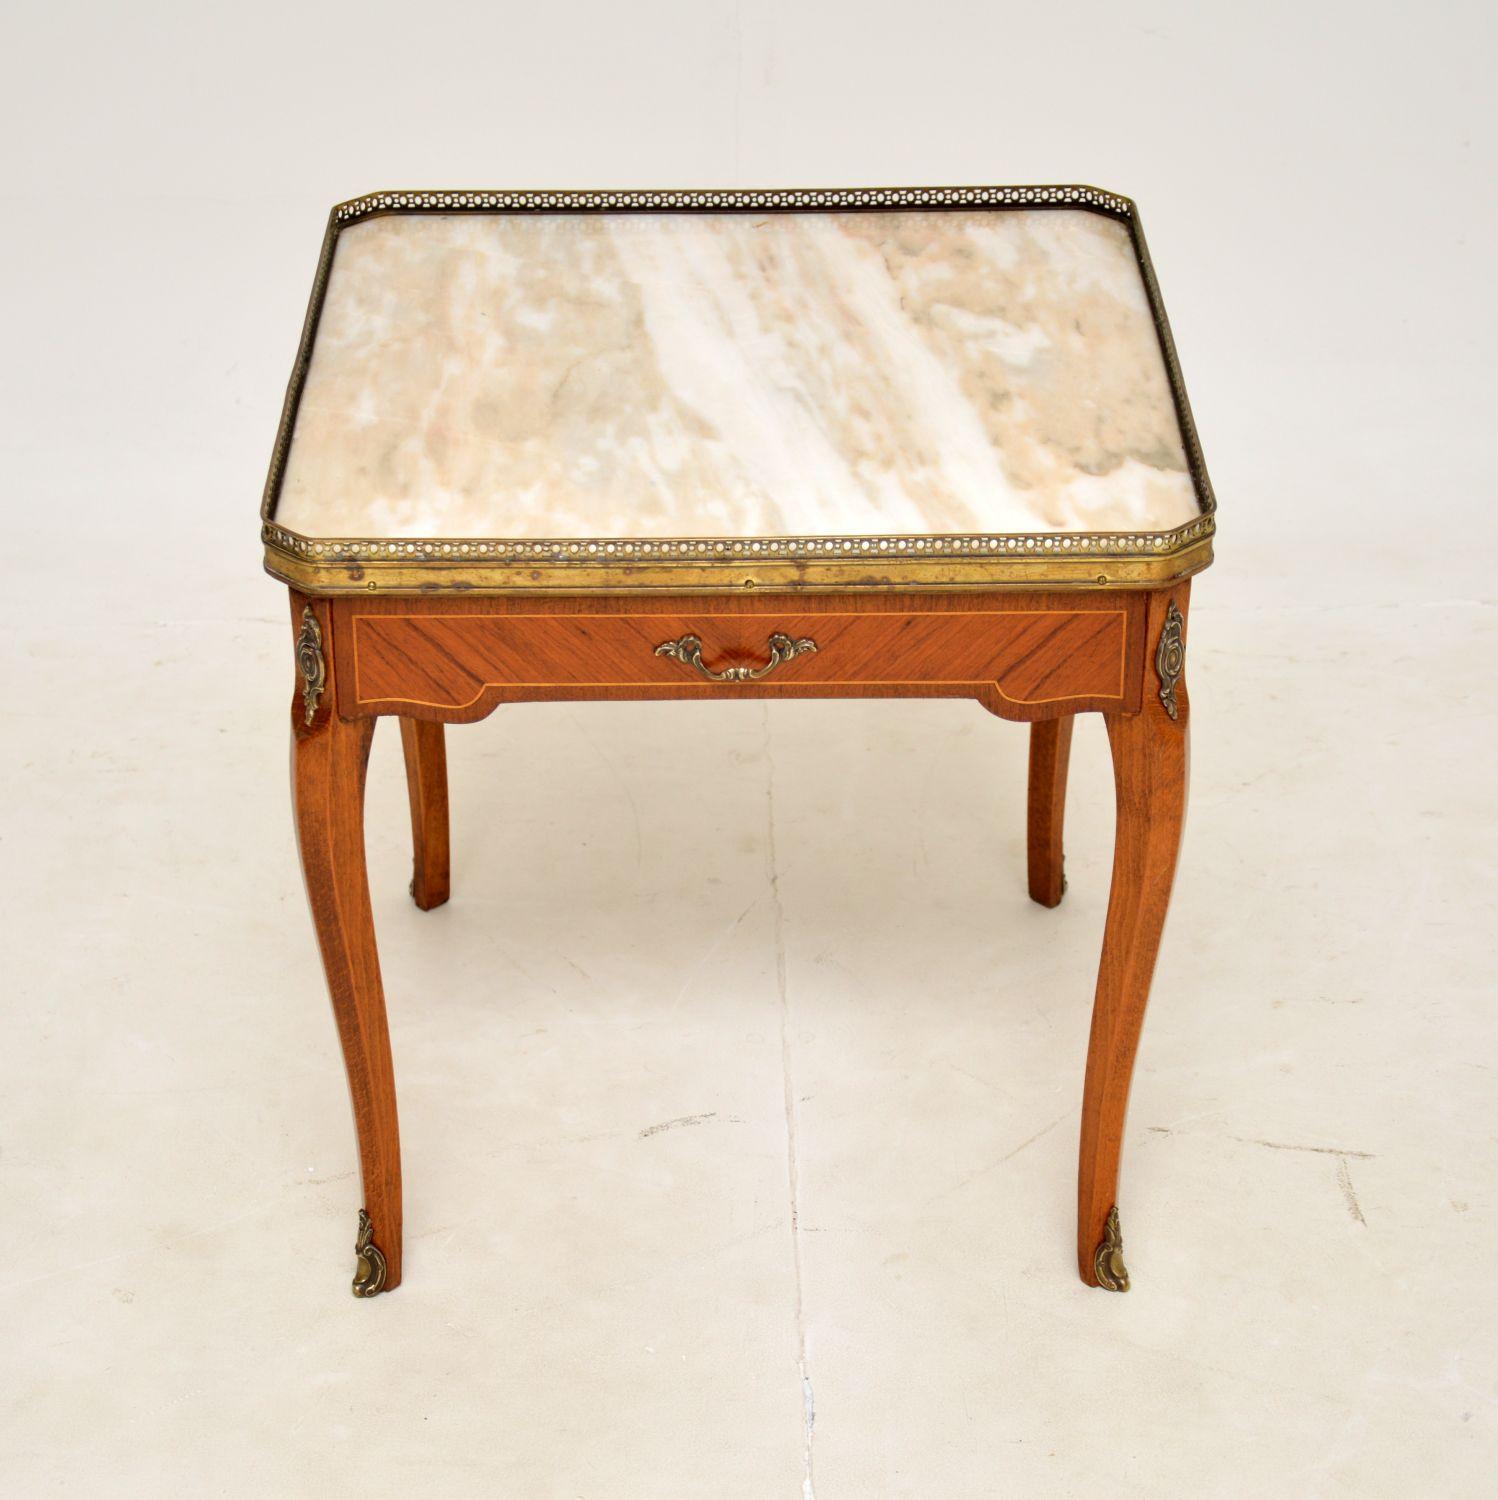 A beautiful antique French marble top coffee table, this dates from around the 1930’s.

It is of super quality, and is a great size to be used as a coffee table or an occasional side table. The marble top has a pierced brass gallery around the edge,